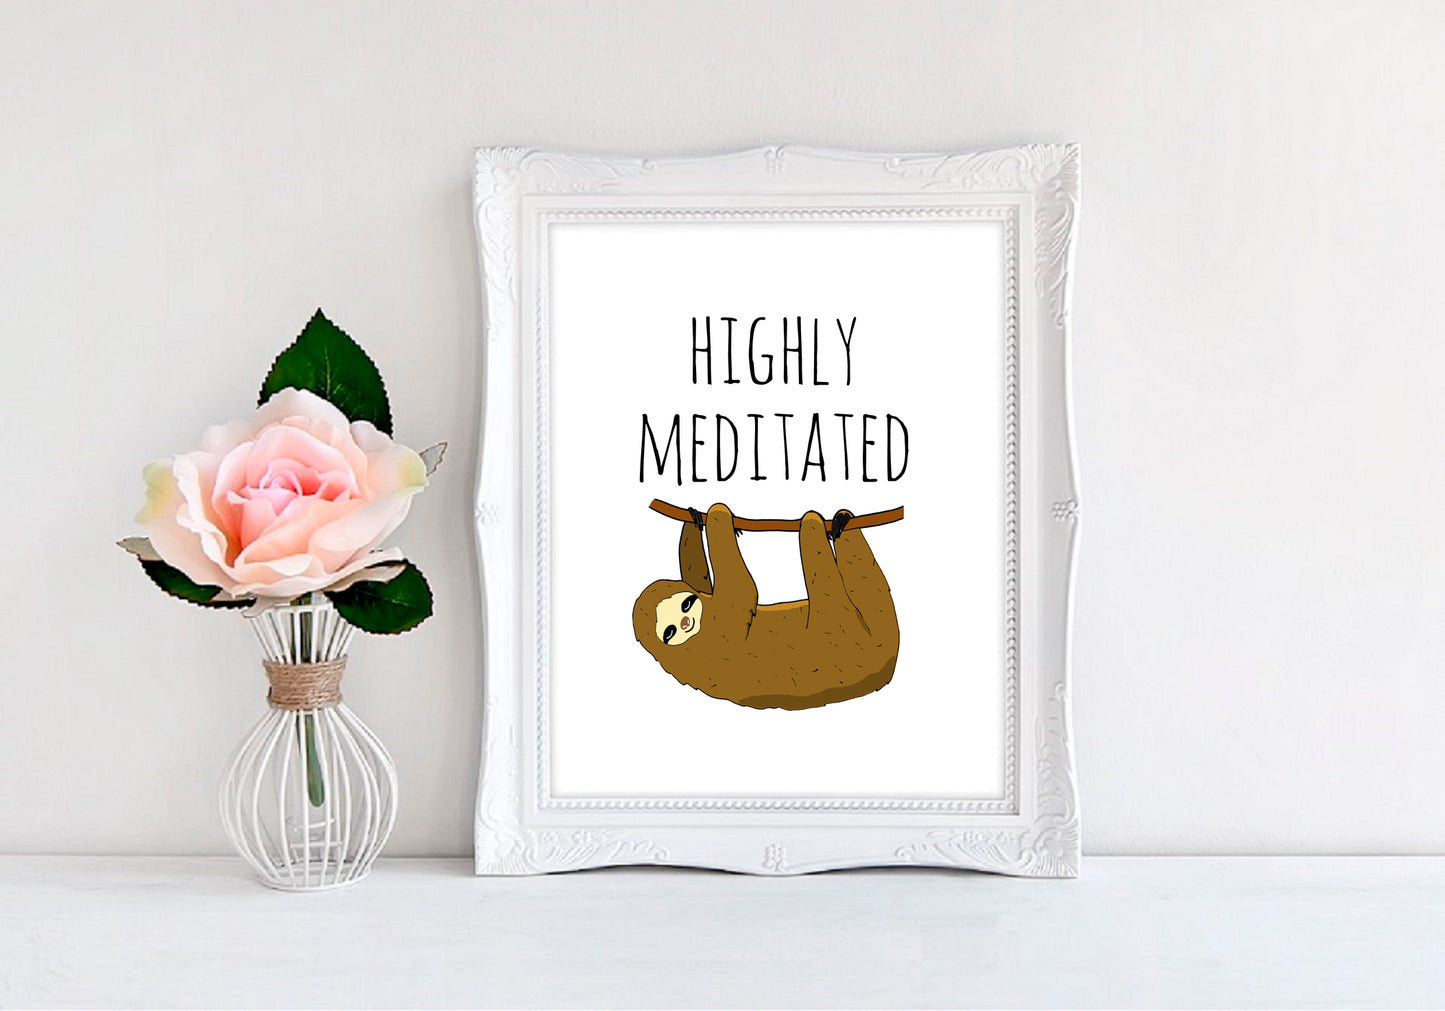 Highly Meditated - 8"x10" Wall Print - MoonlightMakers